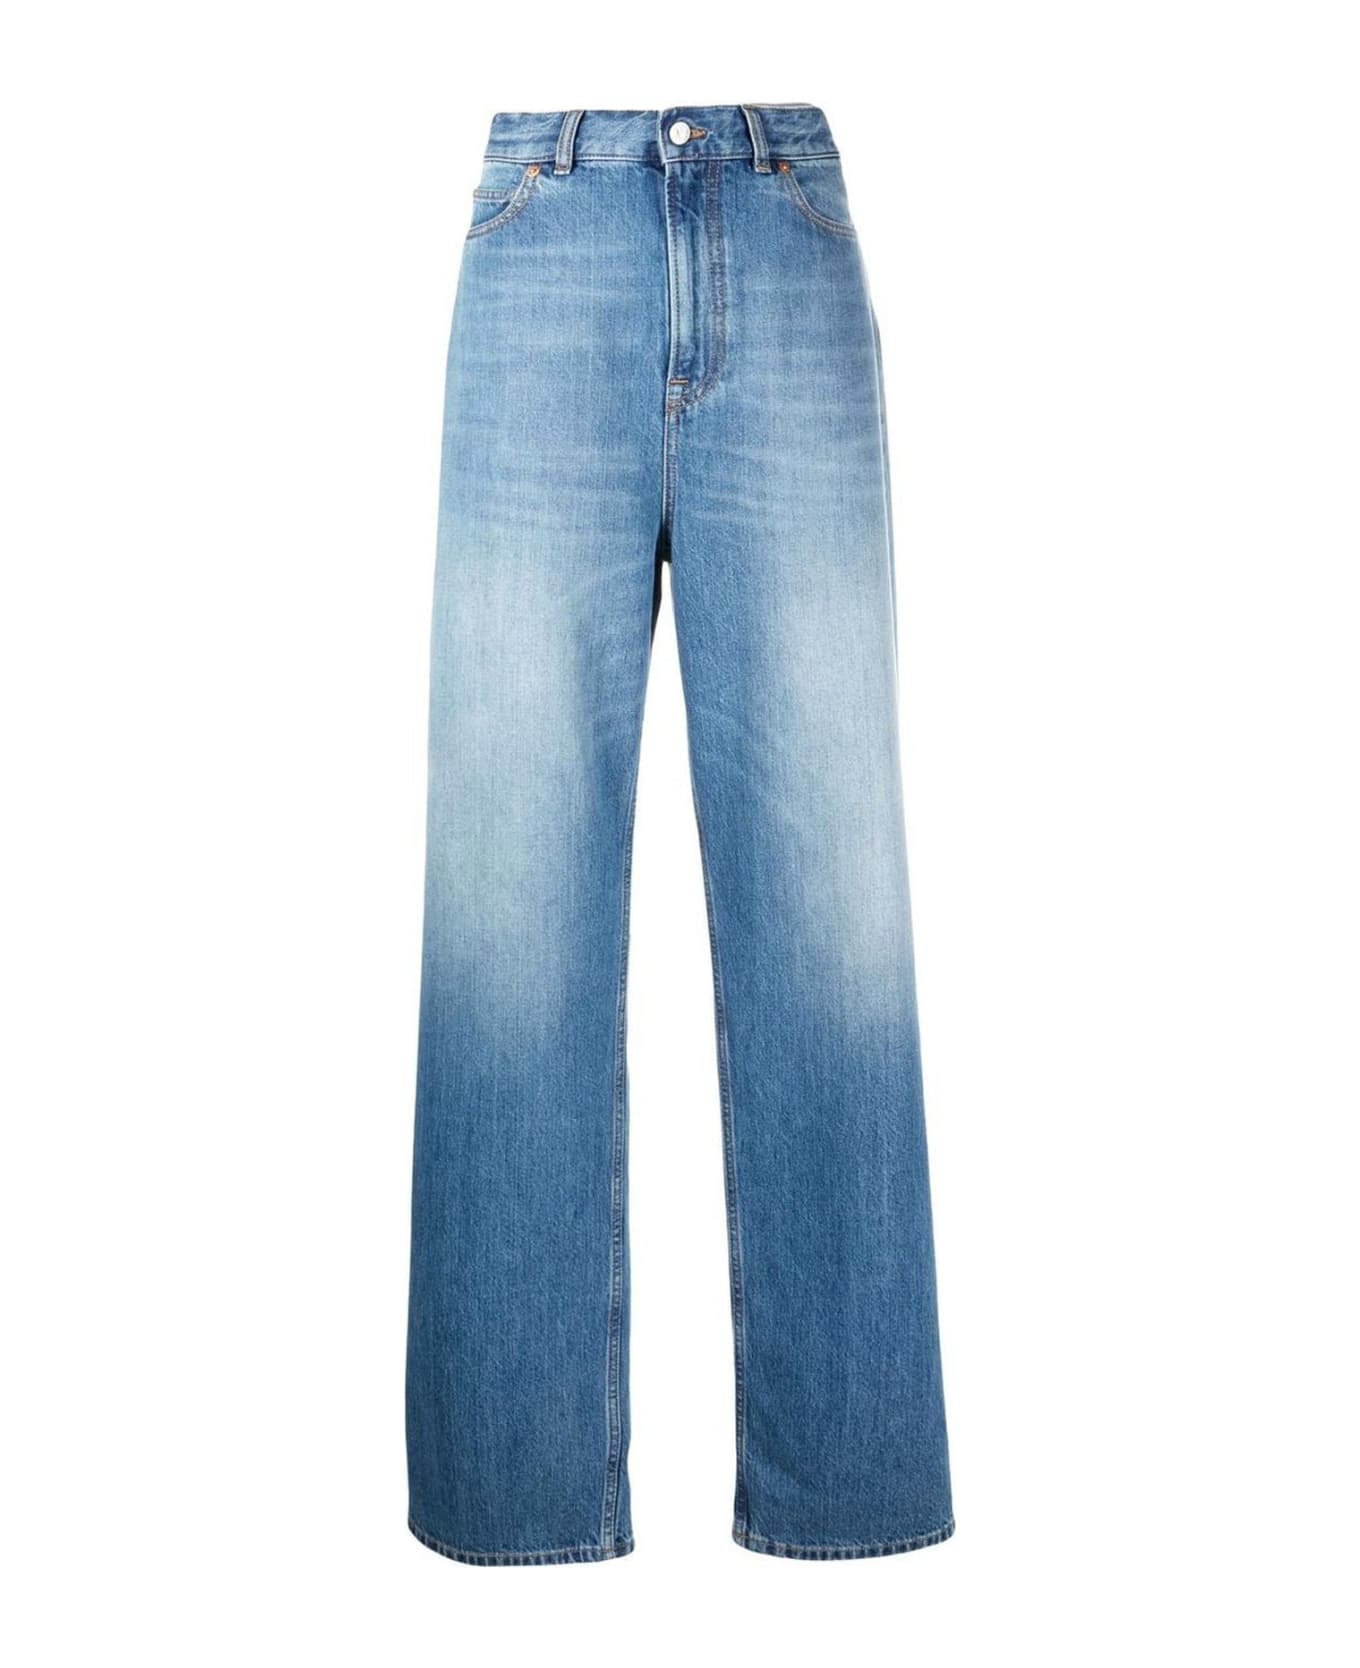 Valentino Archive Patch Jeans - Blue デニム